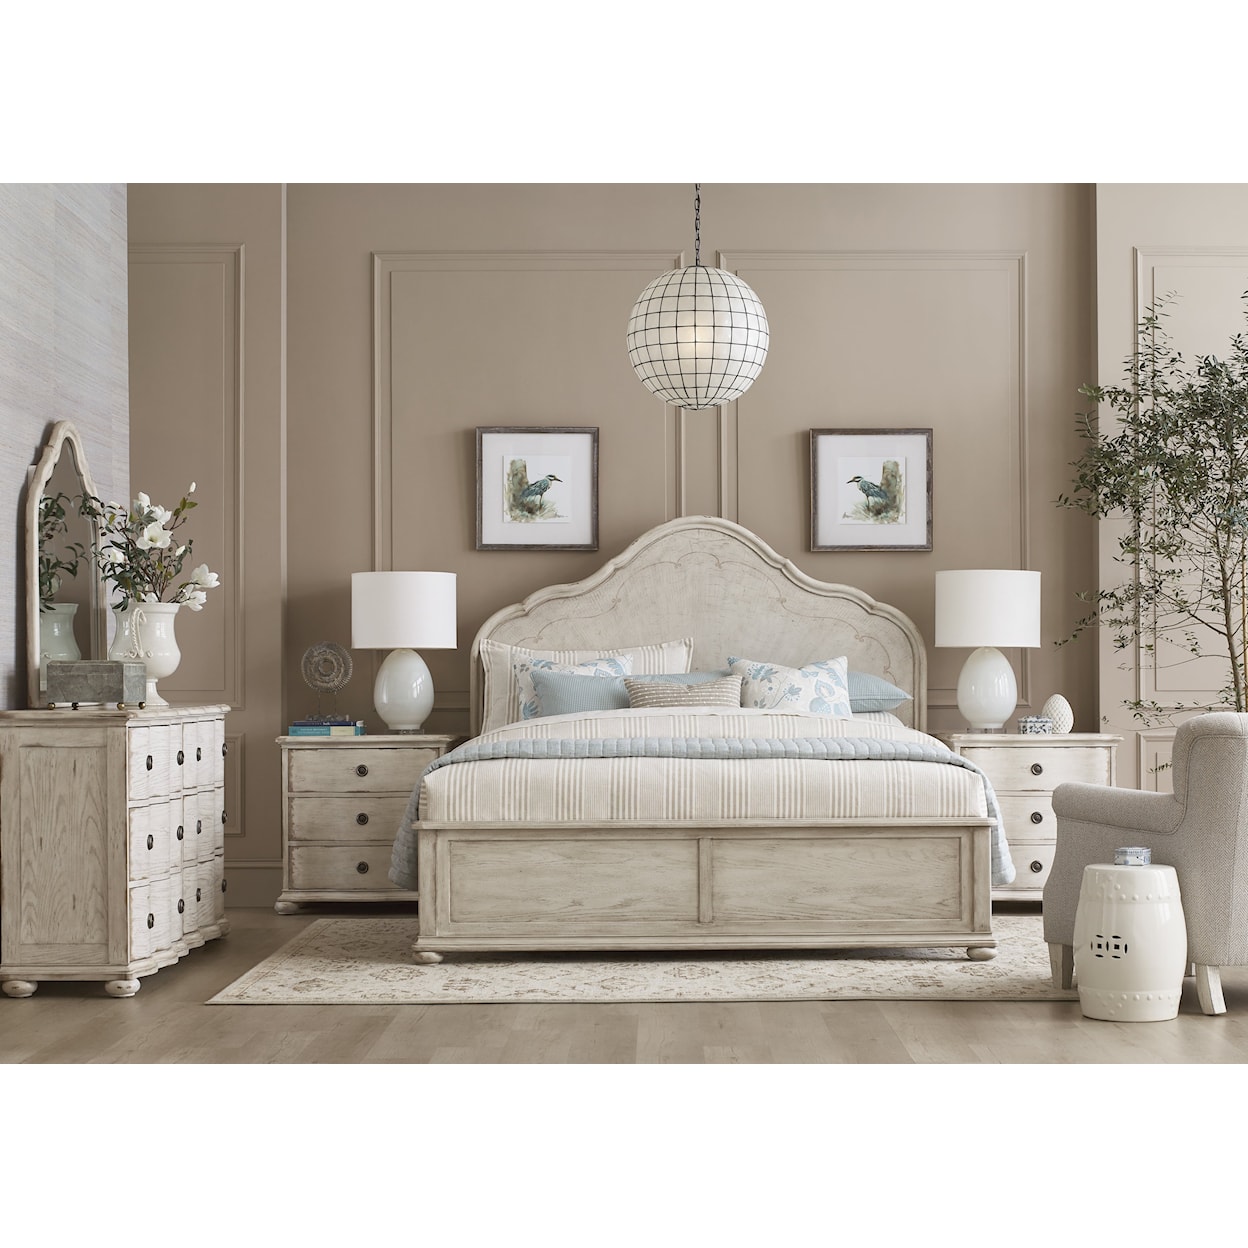 American Drew Cambric King Bed